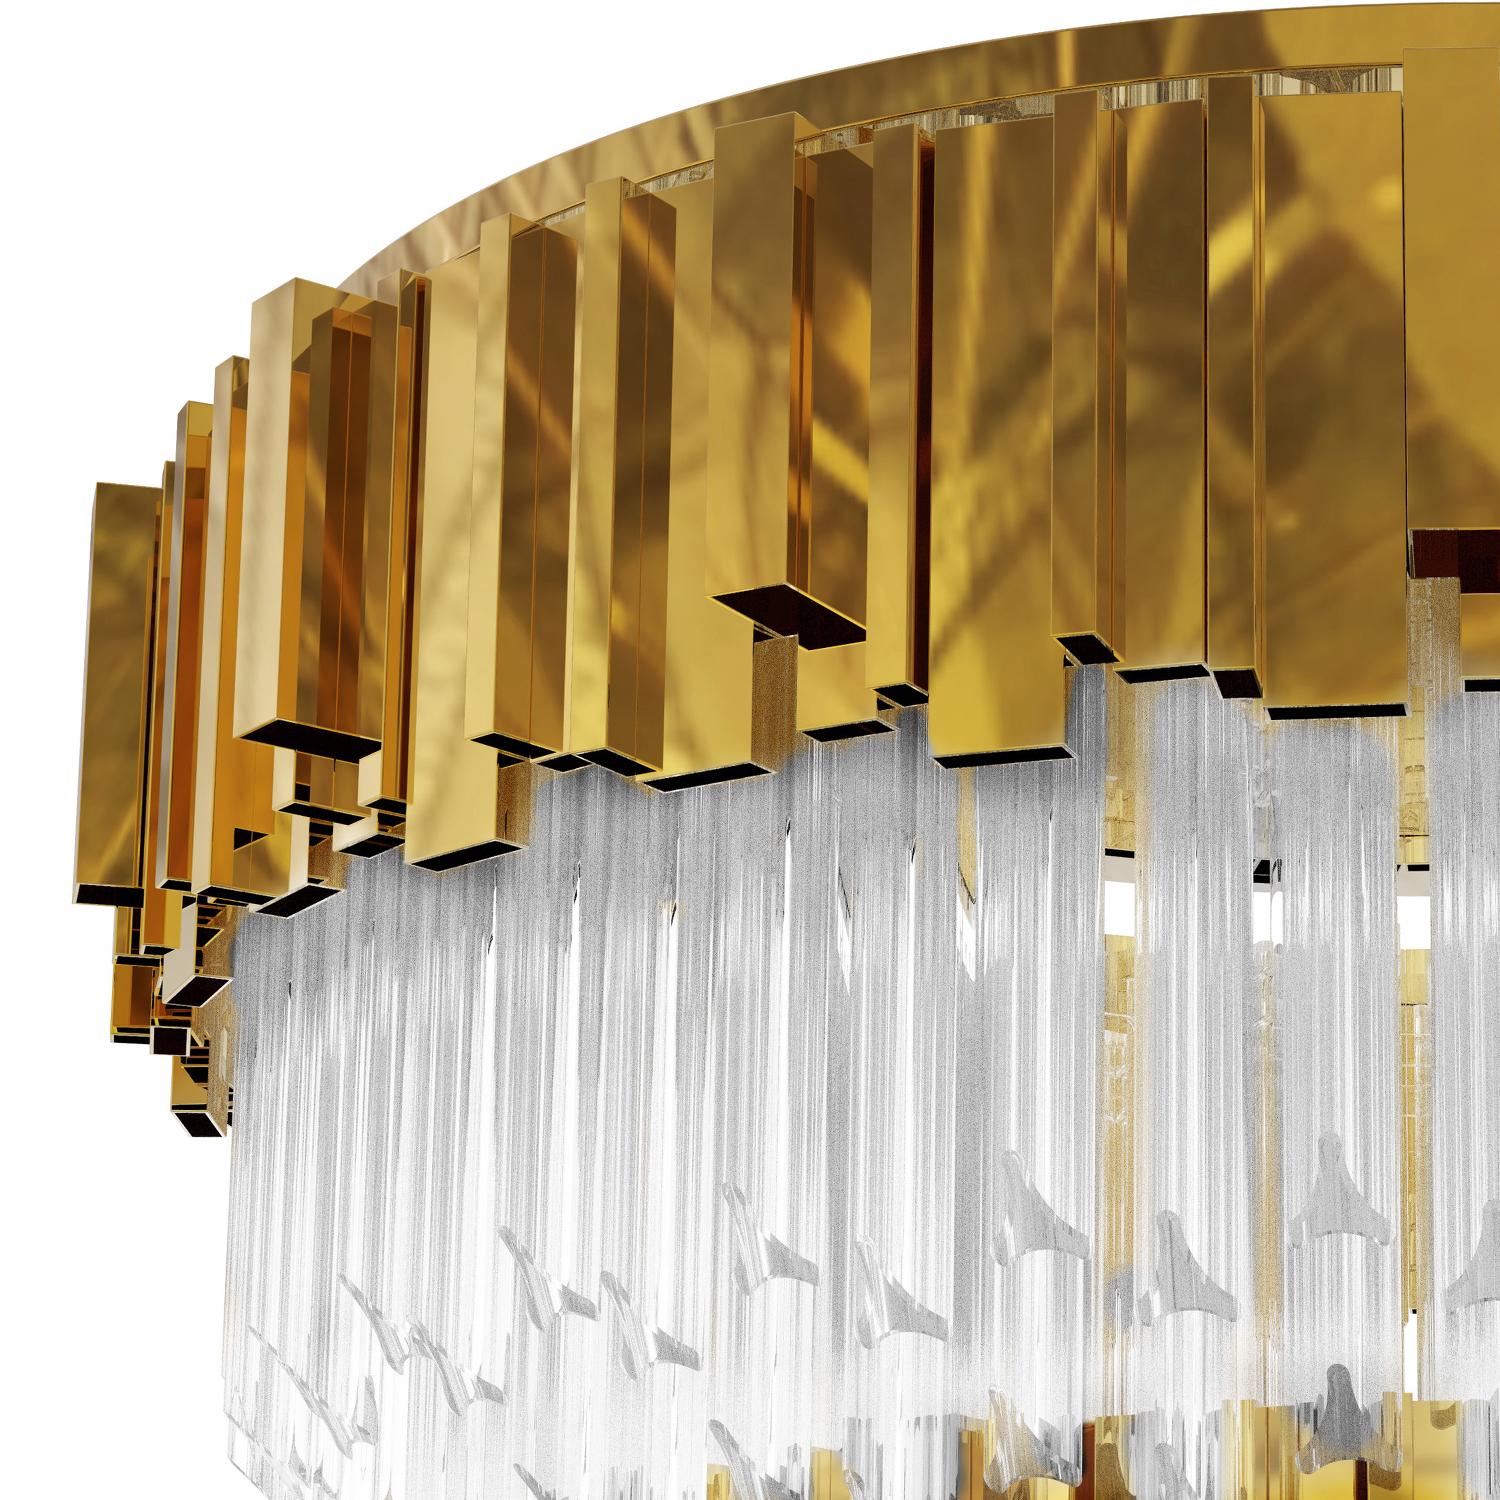 Ceiling lamp ambassador with crystal glass in a circular row 
and gold plated polished brass rectangular rods in circular row.
 With 8 bulbs, lamp holder type G9. 40 Watt max, for 220-240V. 
Bulbs not included.